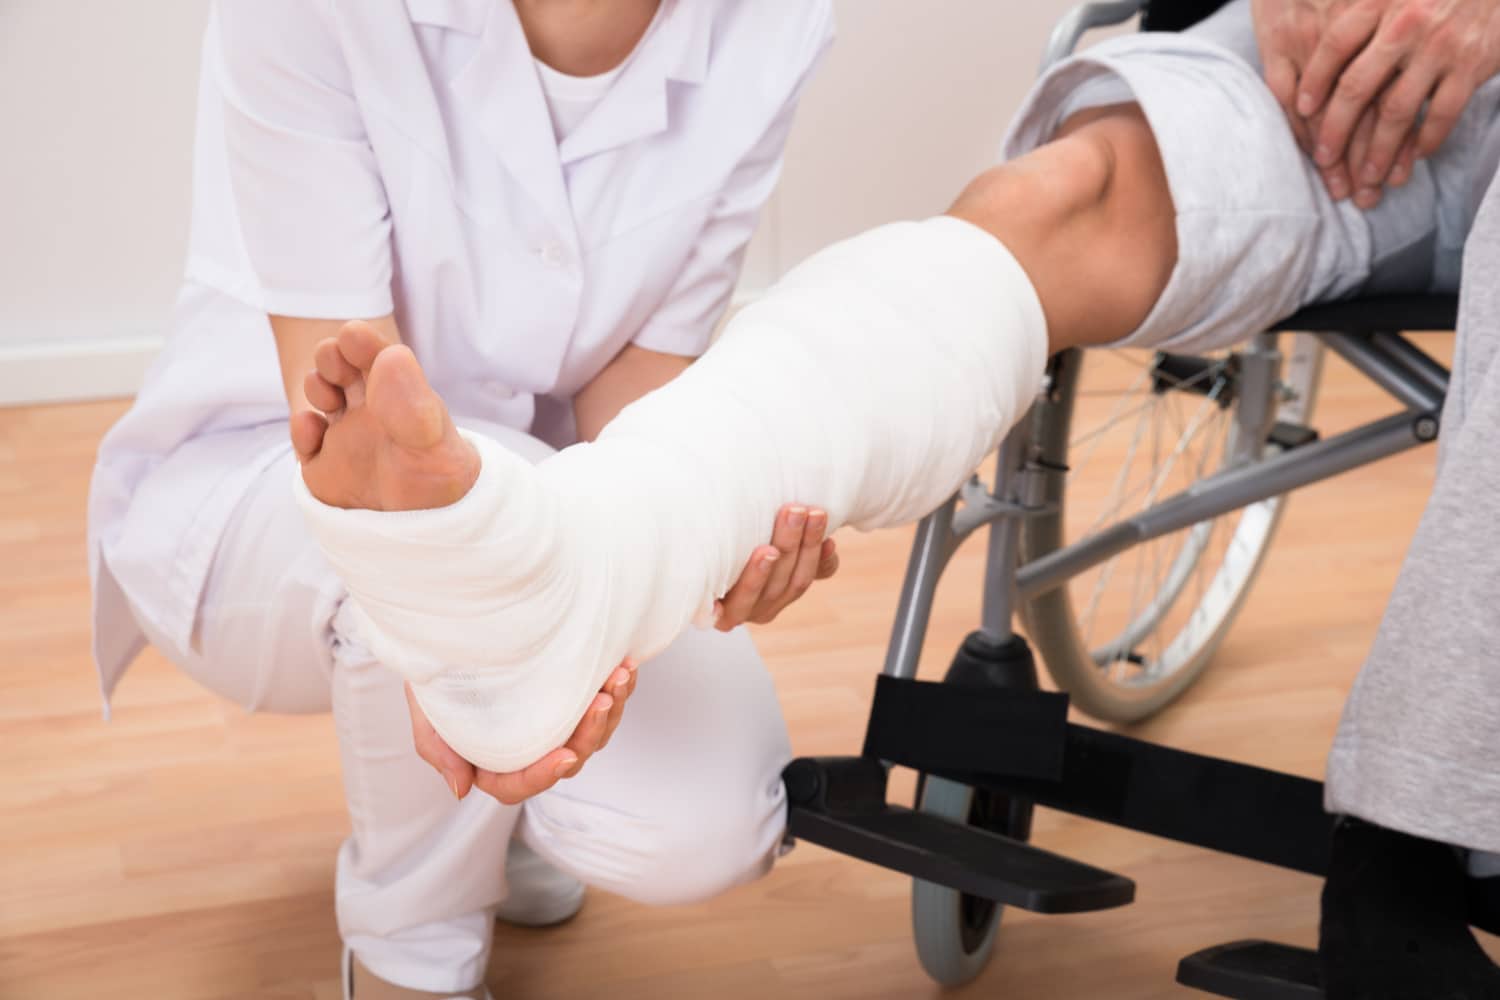 Car Accidents and Broken Bones: How Much Is My Case Worth?